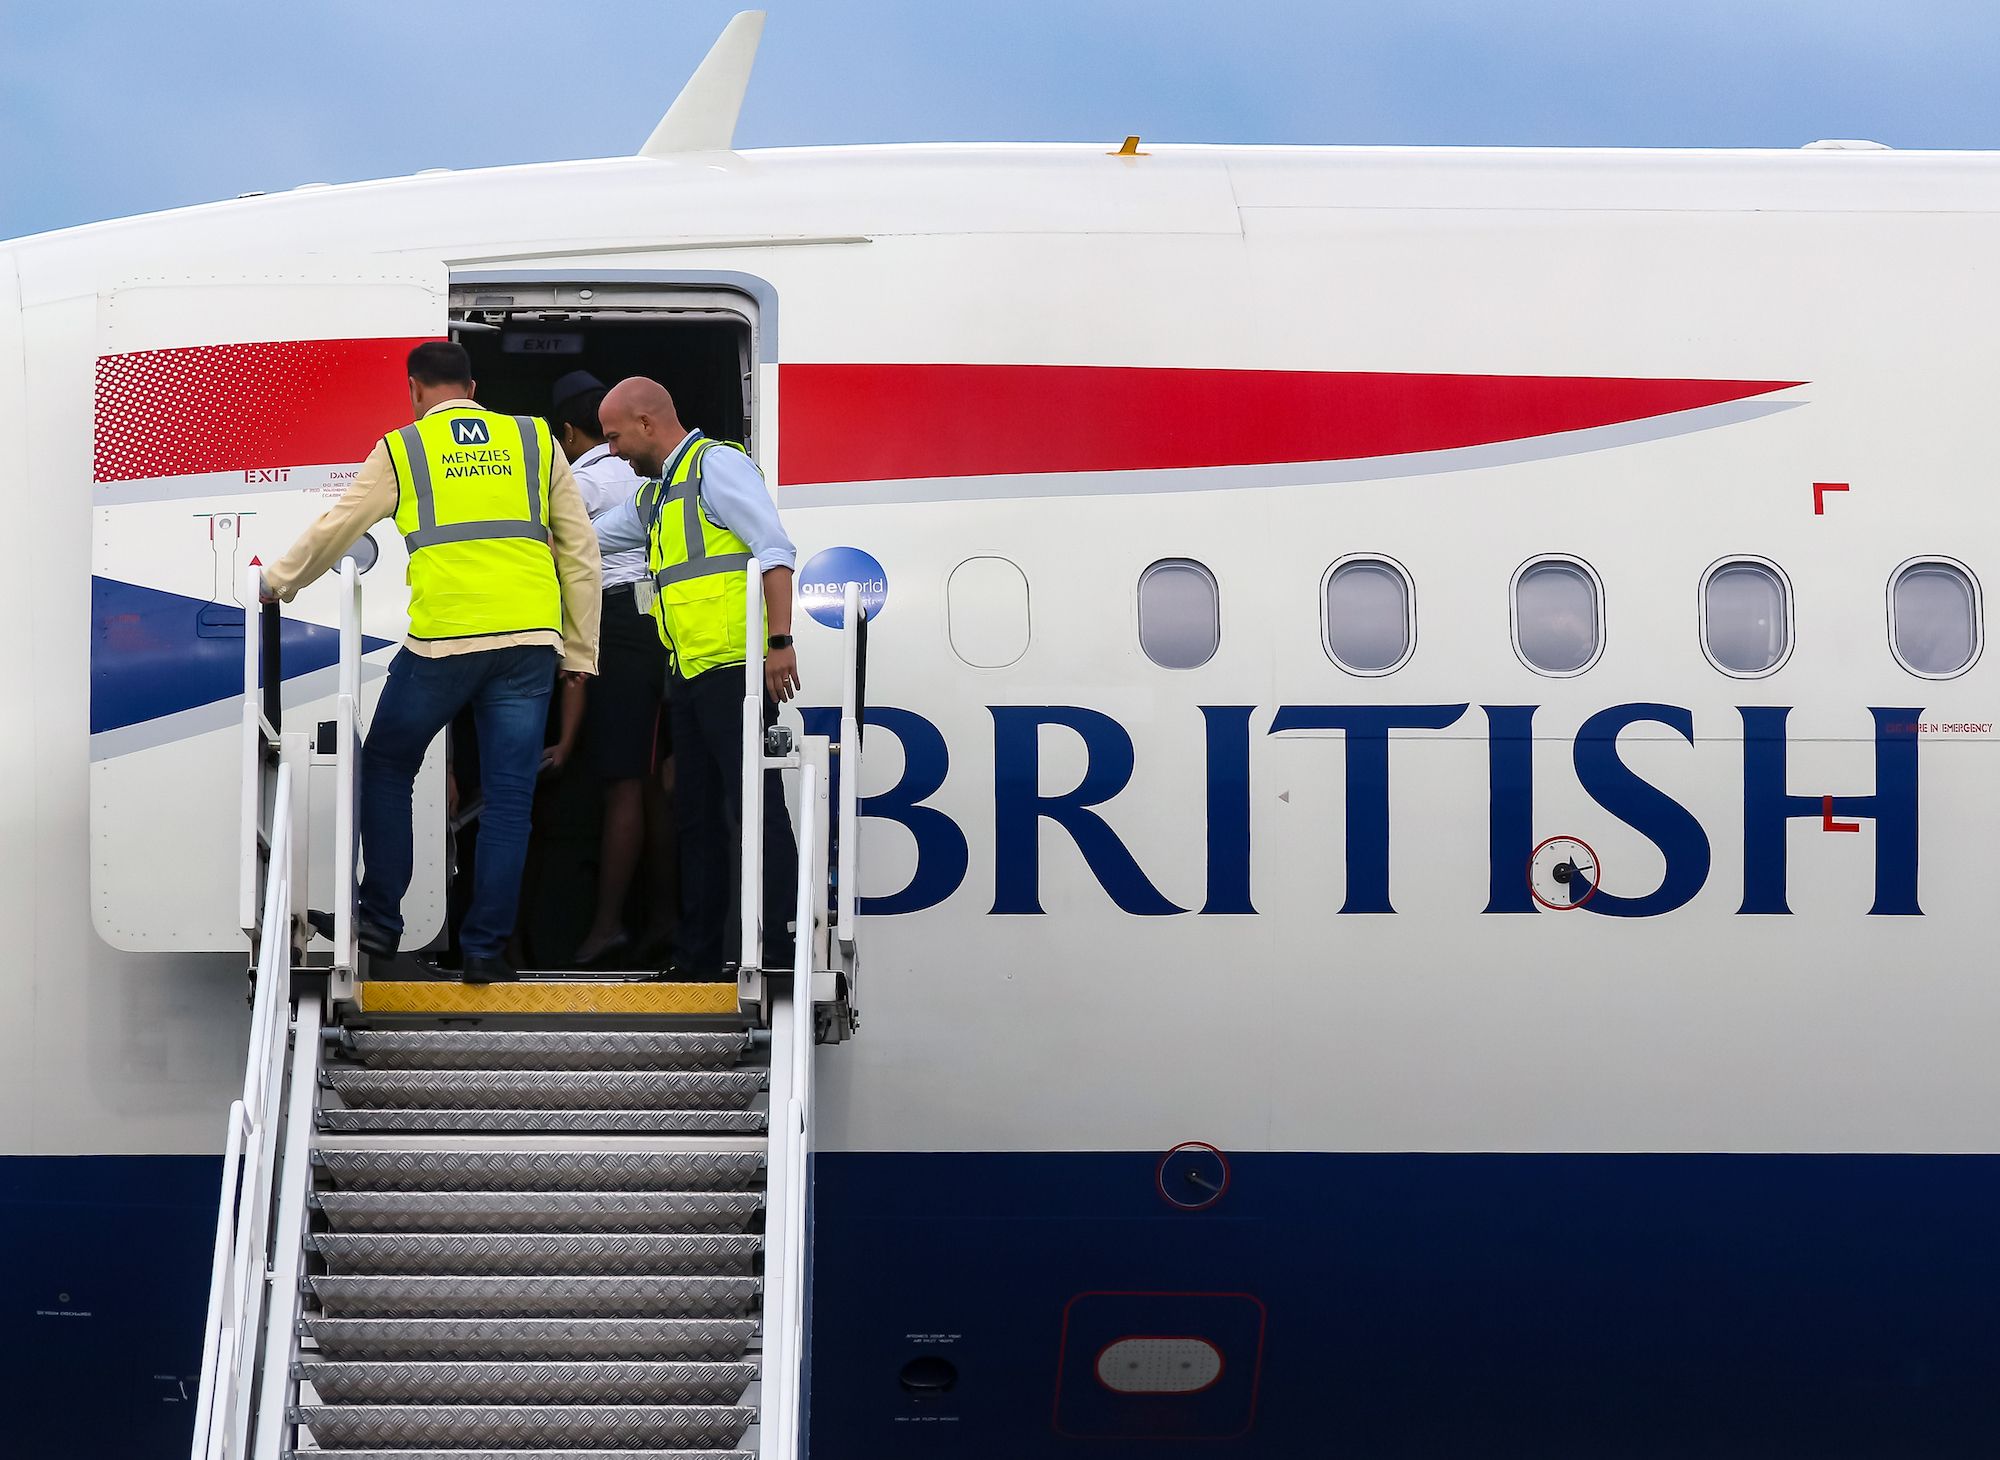 Ramp staff onboard a British Airways Airbus A321 aircraft